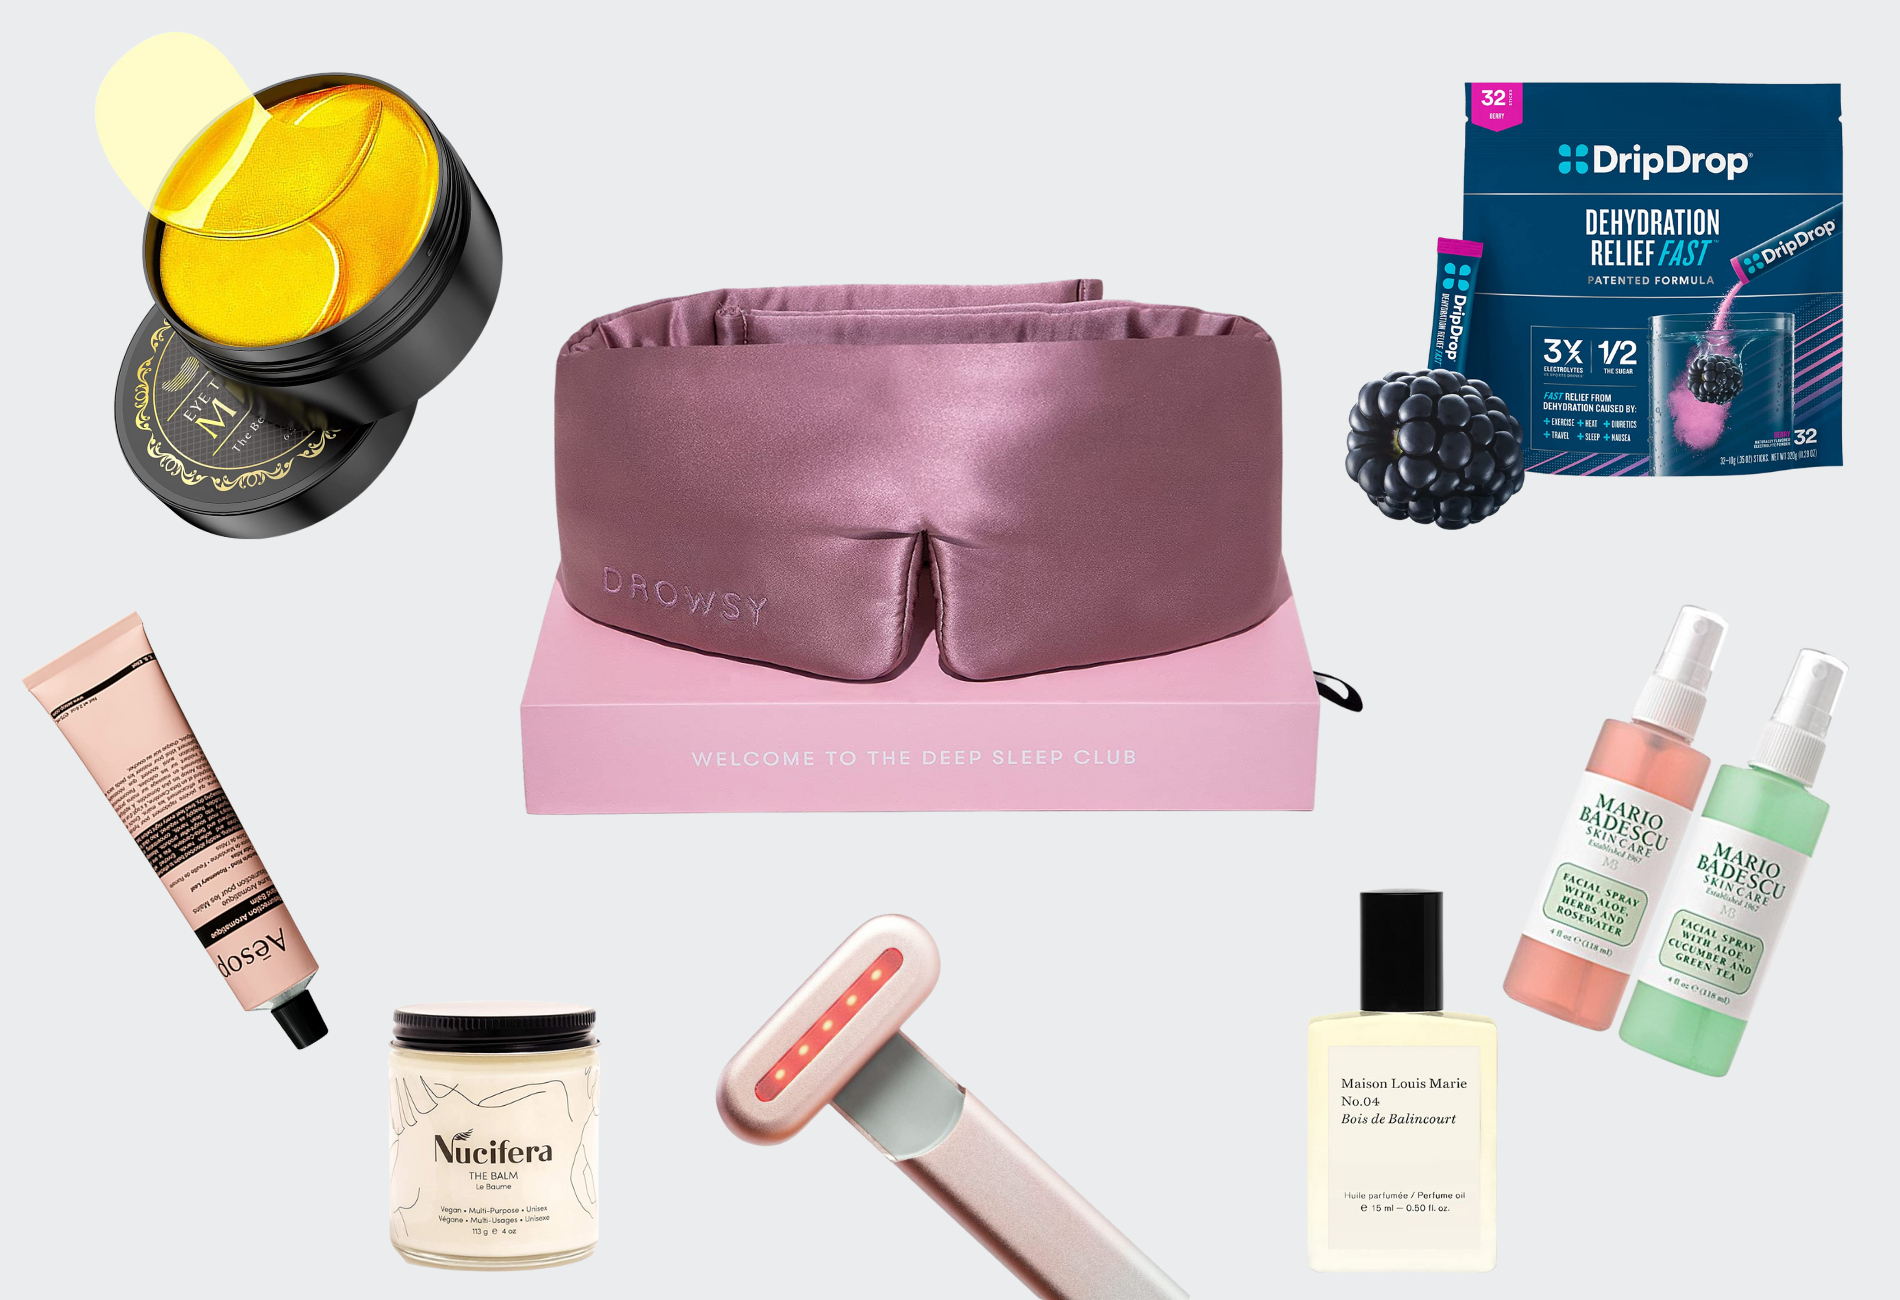 travel products dispersed on page, including pink sleep mask, perfume bottle, and bottle of oil